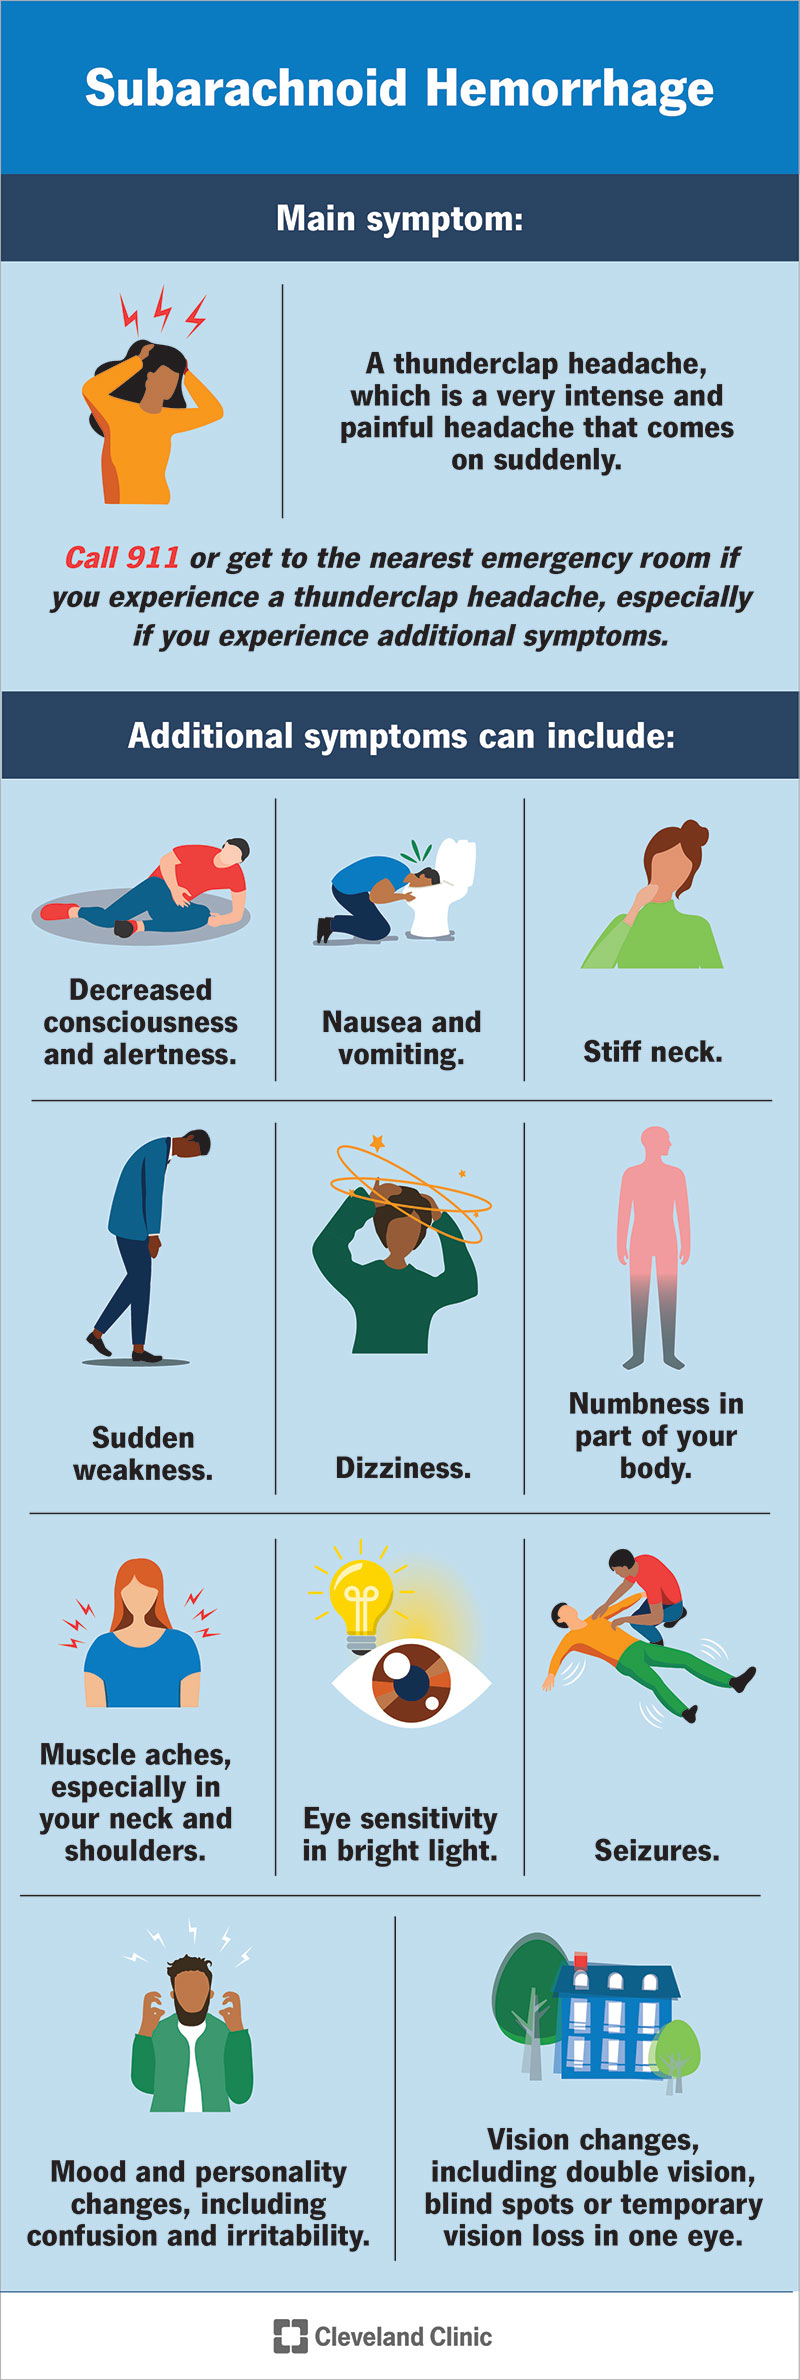 The main symptom of SAH is a a sudden and severe headache. Other symptoms include stiff neck, sudden weakness, dizziness and more.